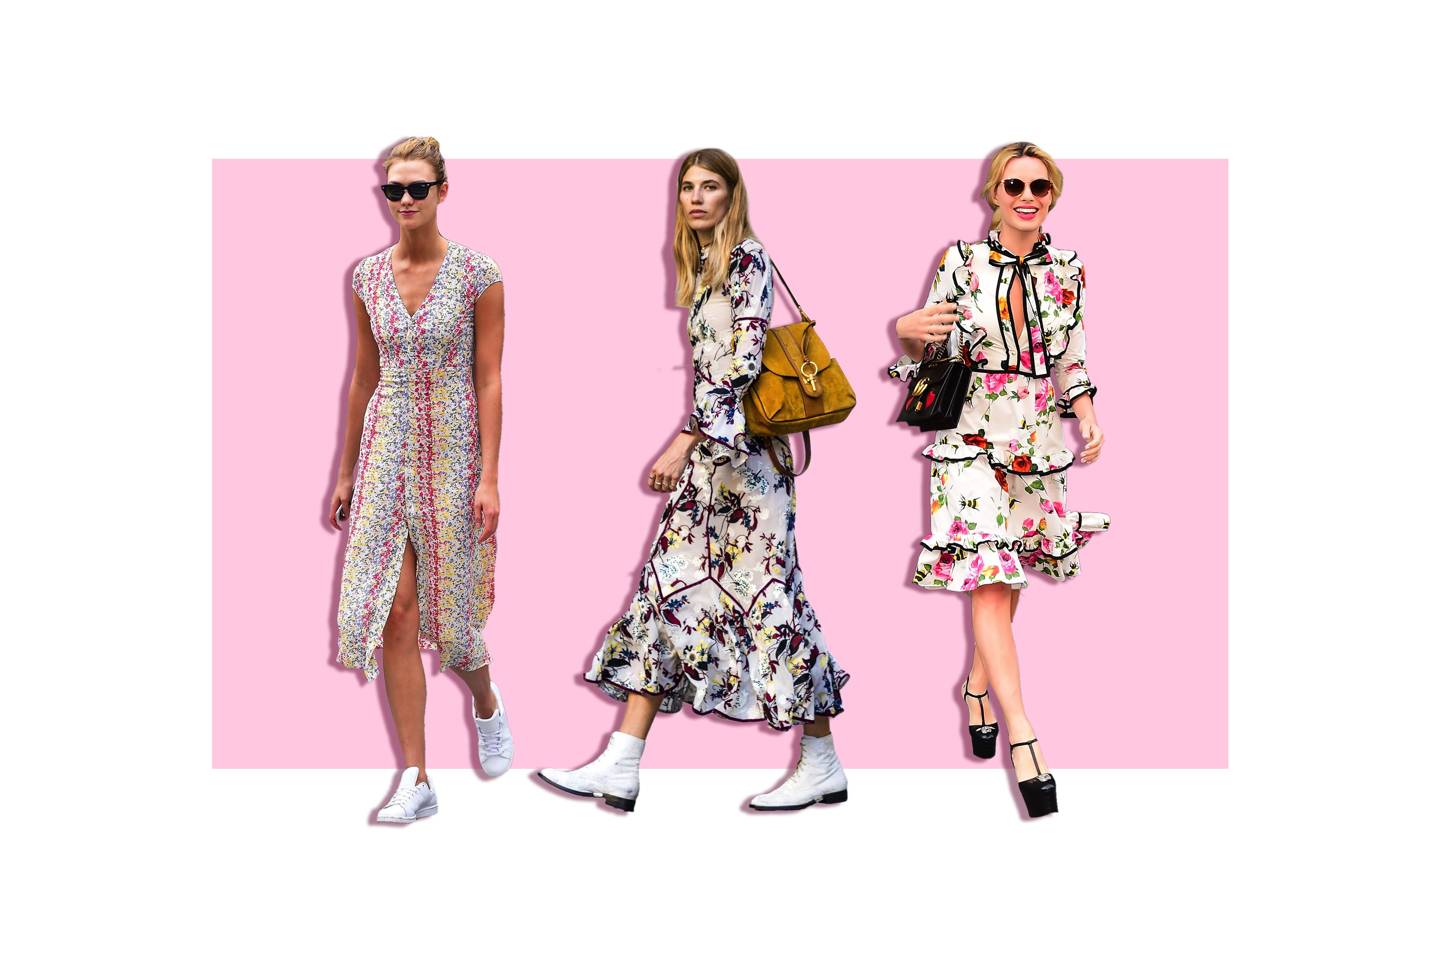 30 floral dresses for when you want to get your girly game on - Glamour.com